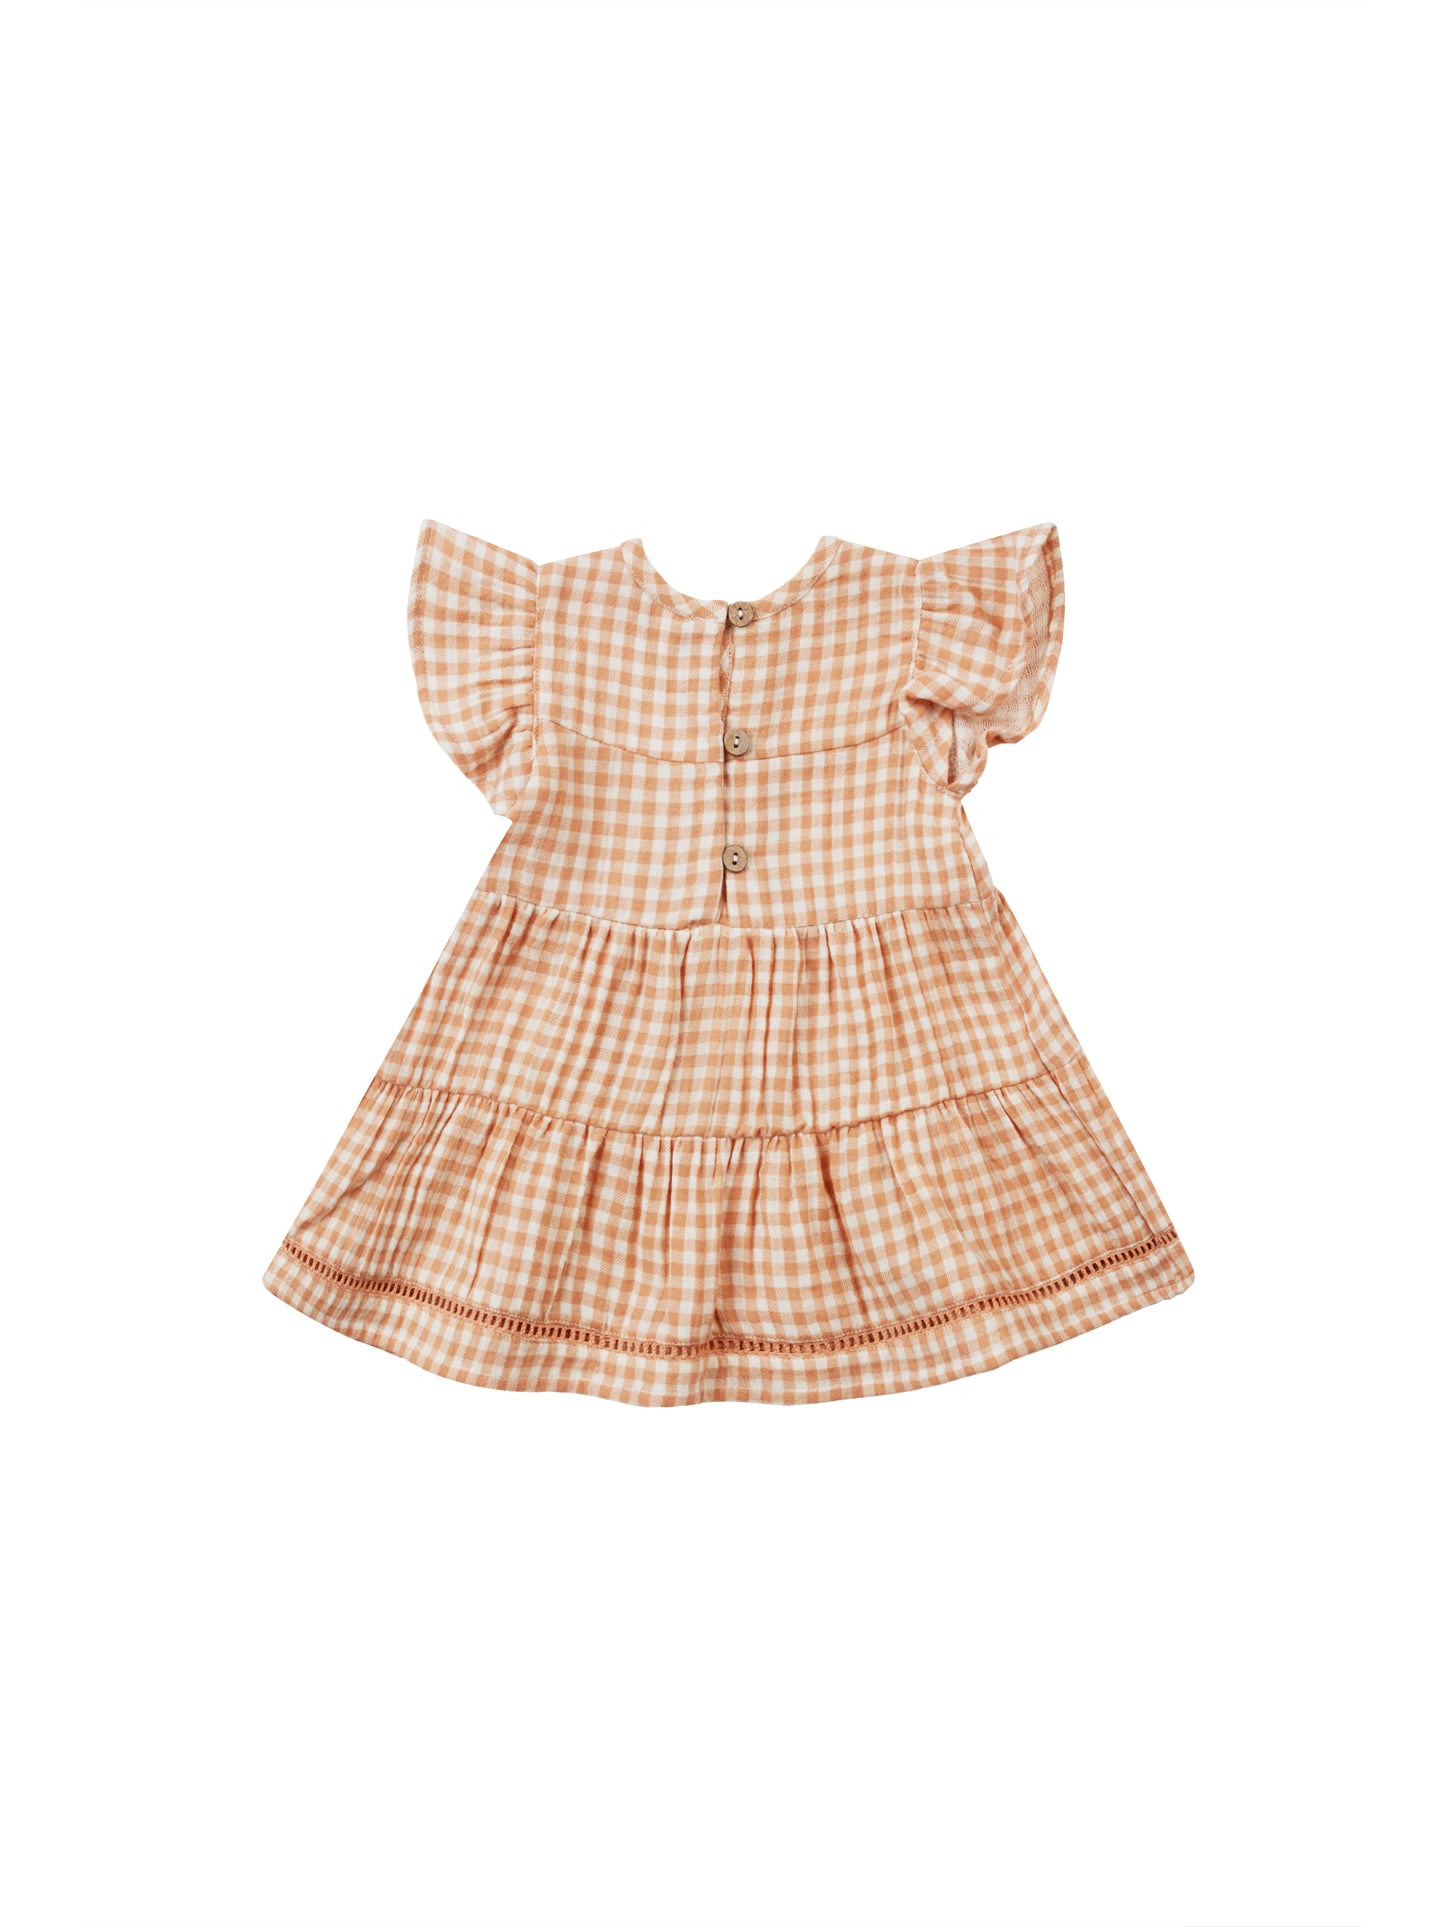 Quincy Mae - Lily Dress | Melon Gingham